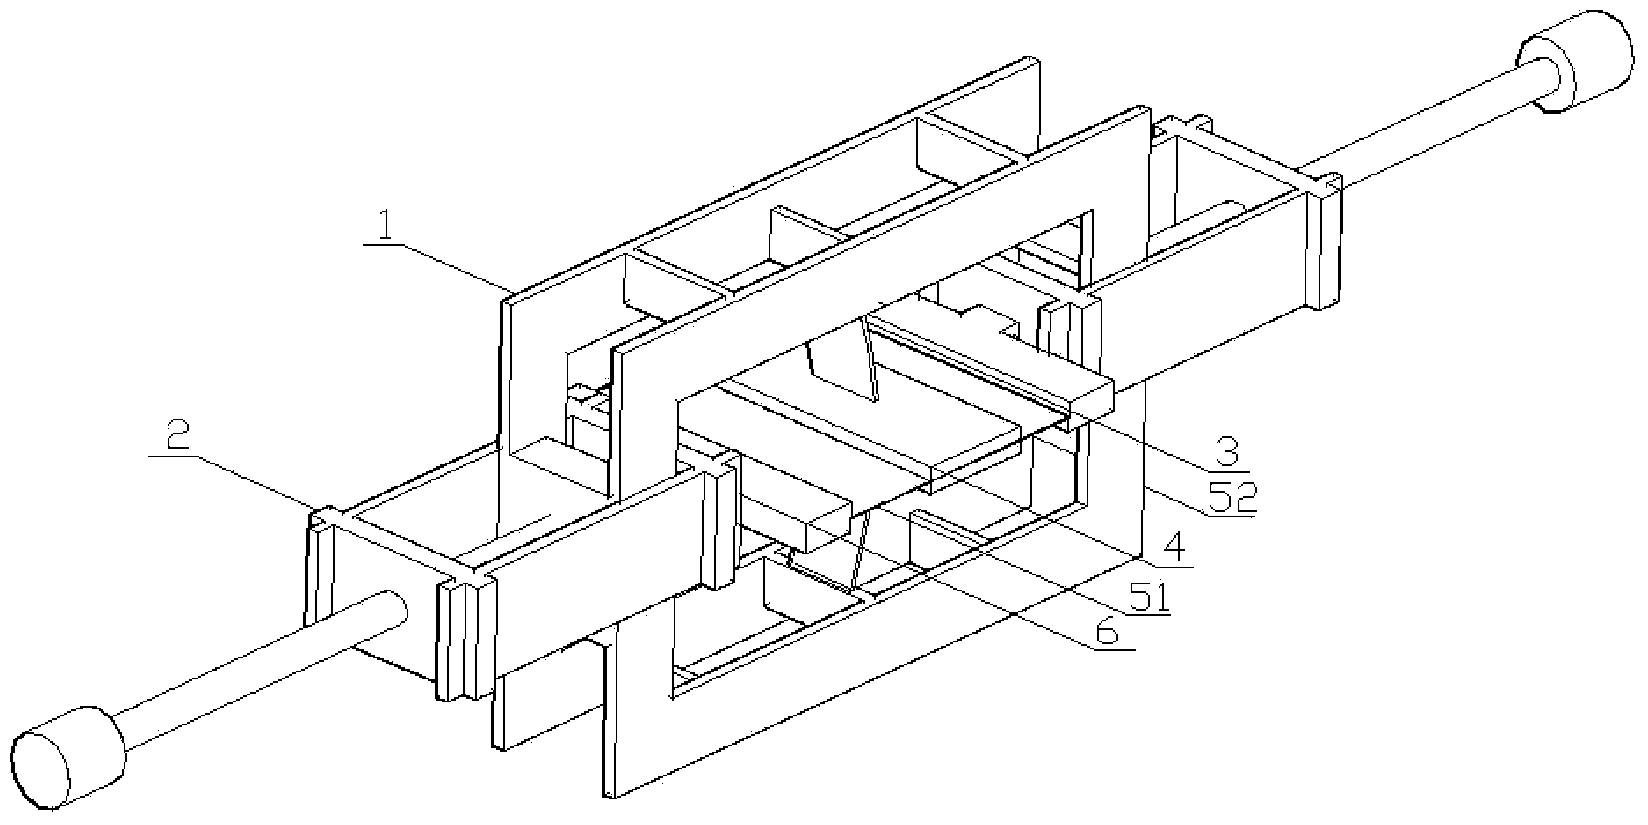 Bistable state actuator